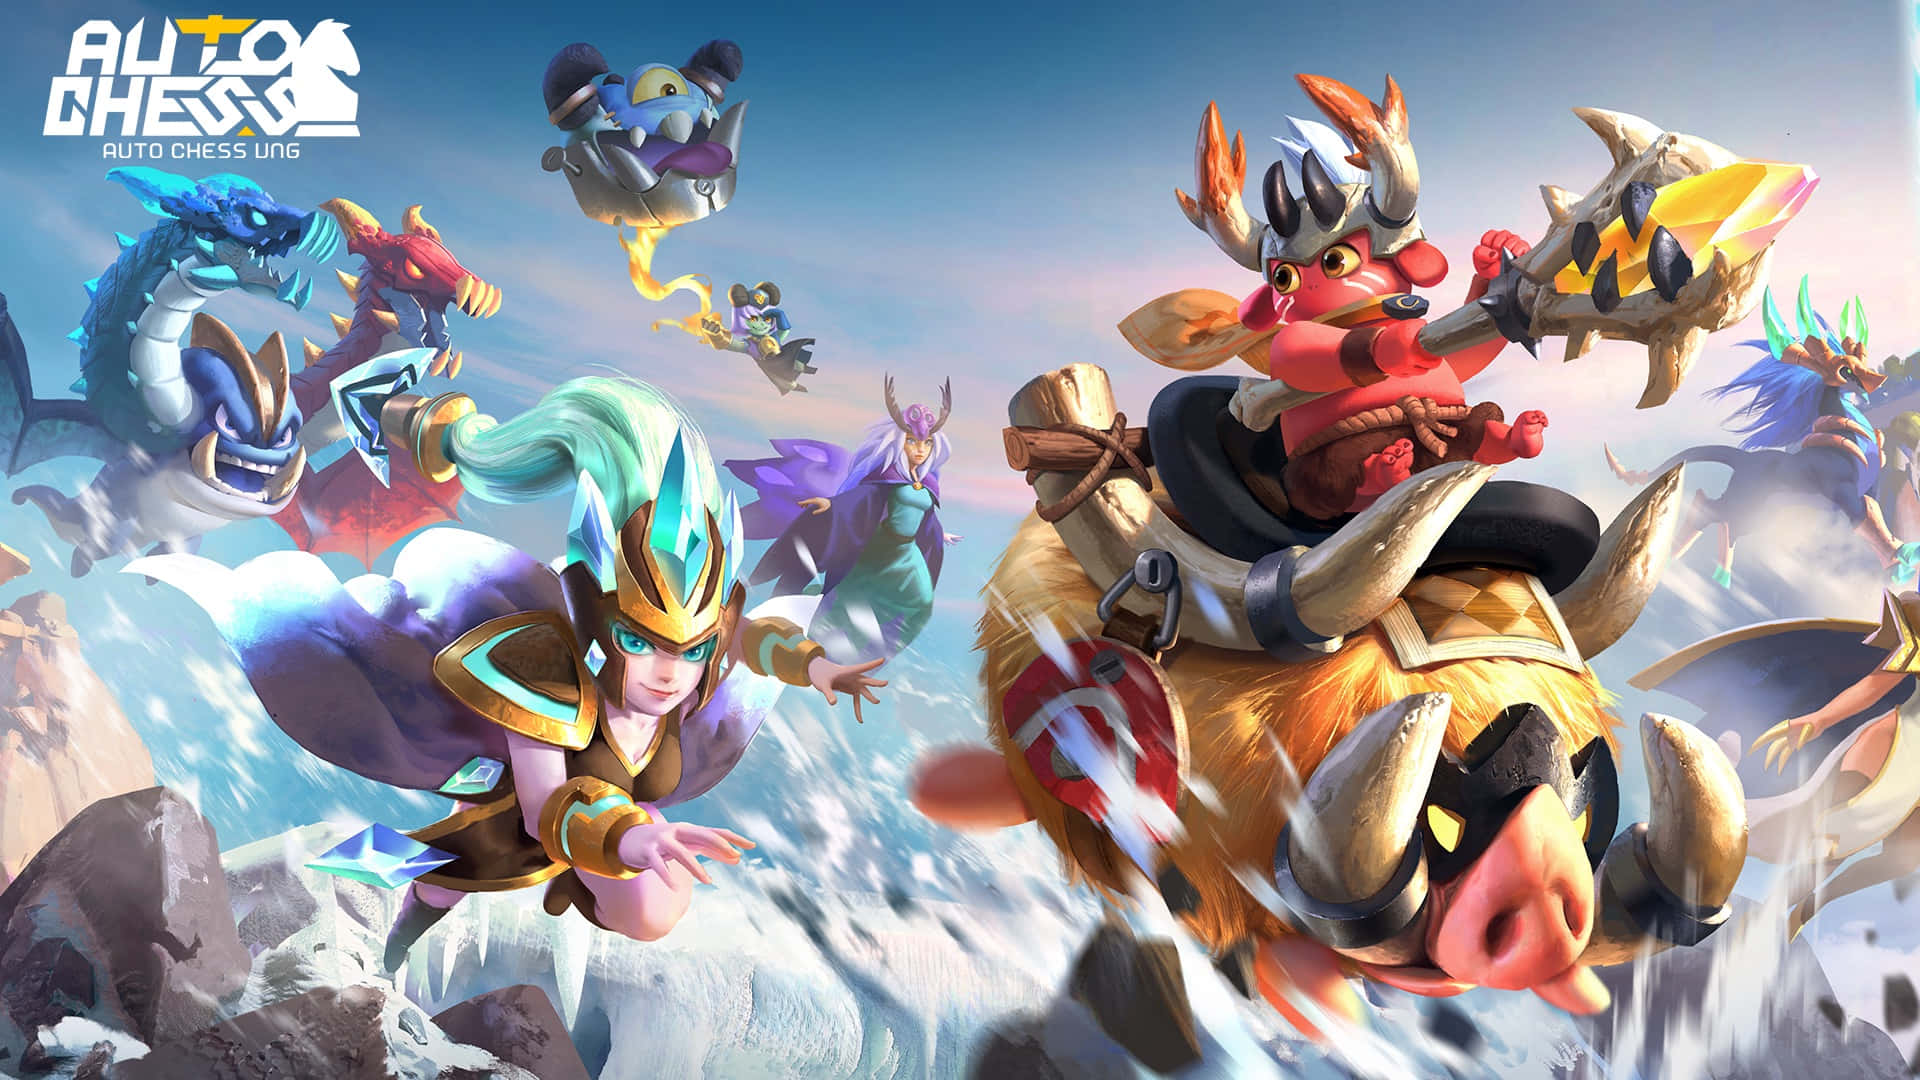 Caption: Intense Battle of Champions in a Moba Game Wallpaper